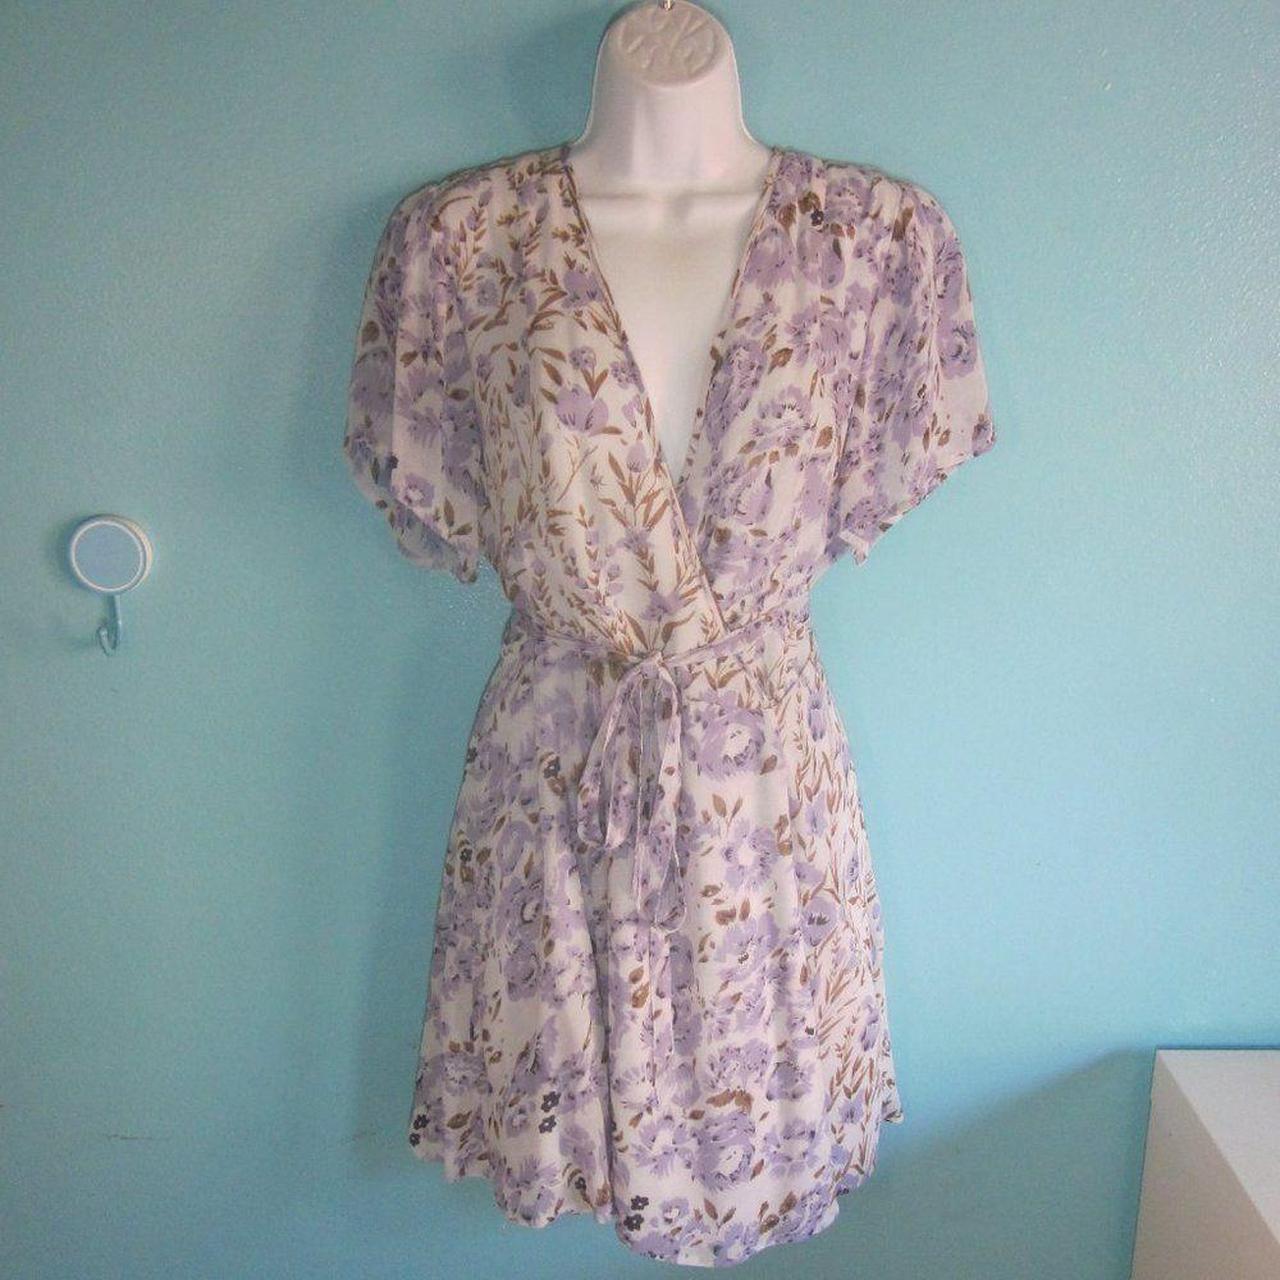 item listed by revisitvintage1